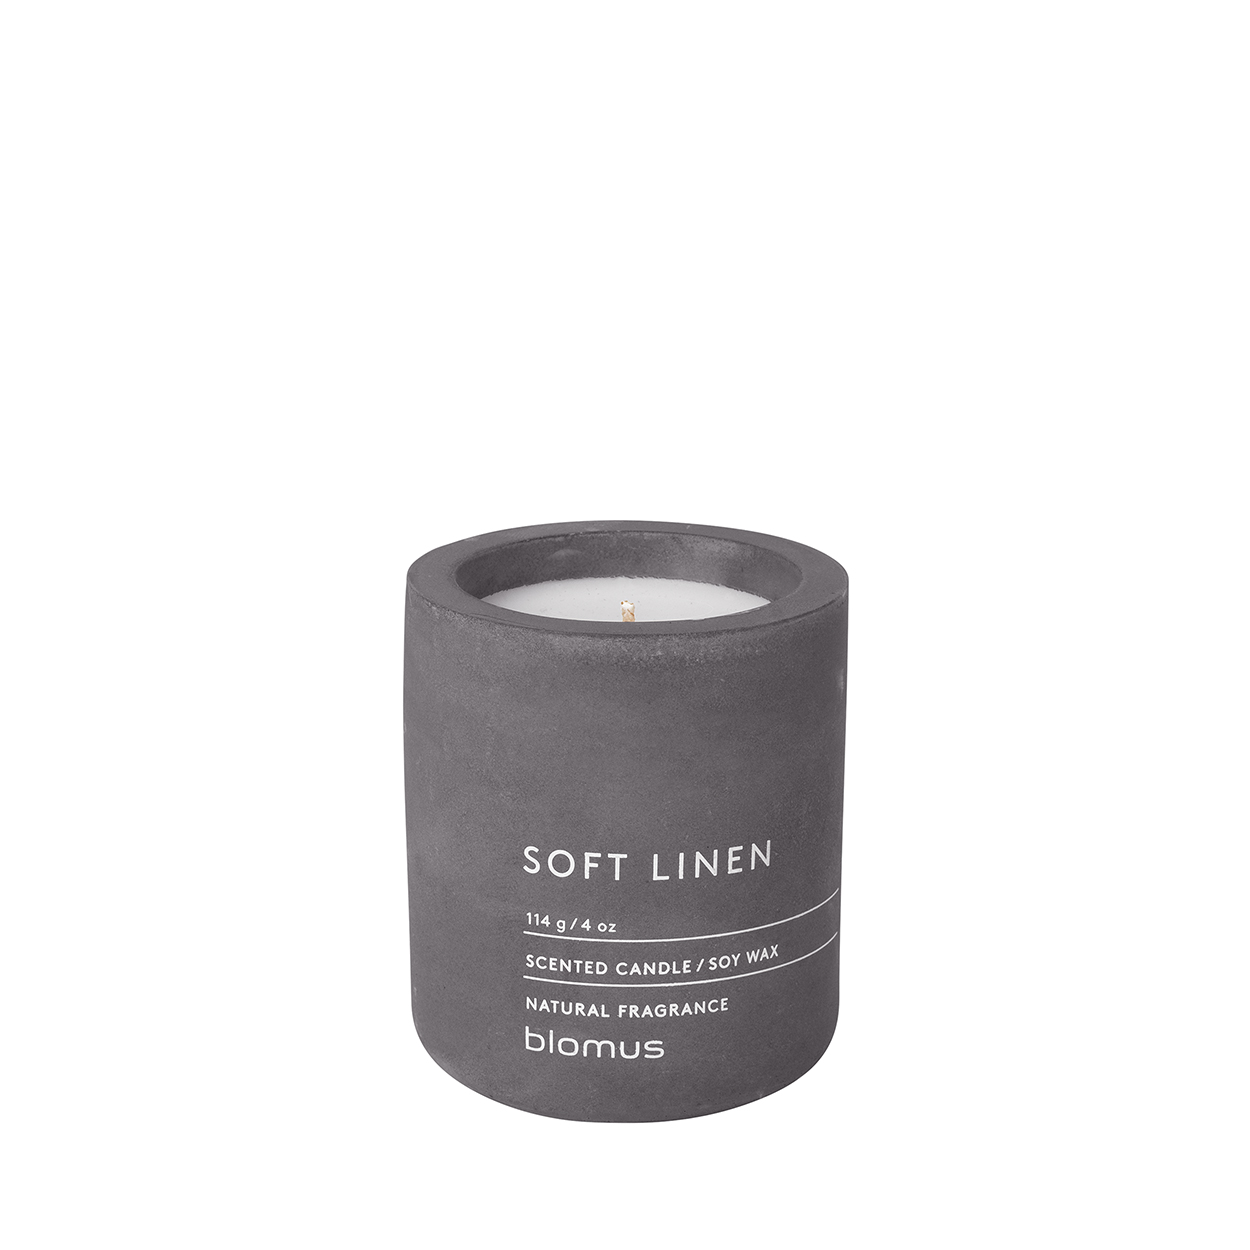 Blomus Small Soft Linen Scented Candle